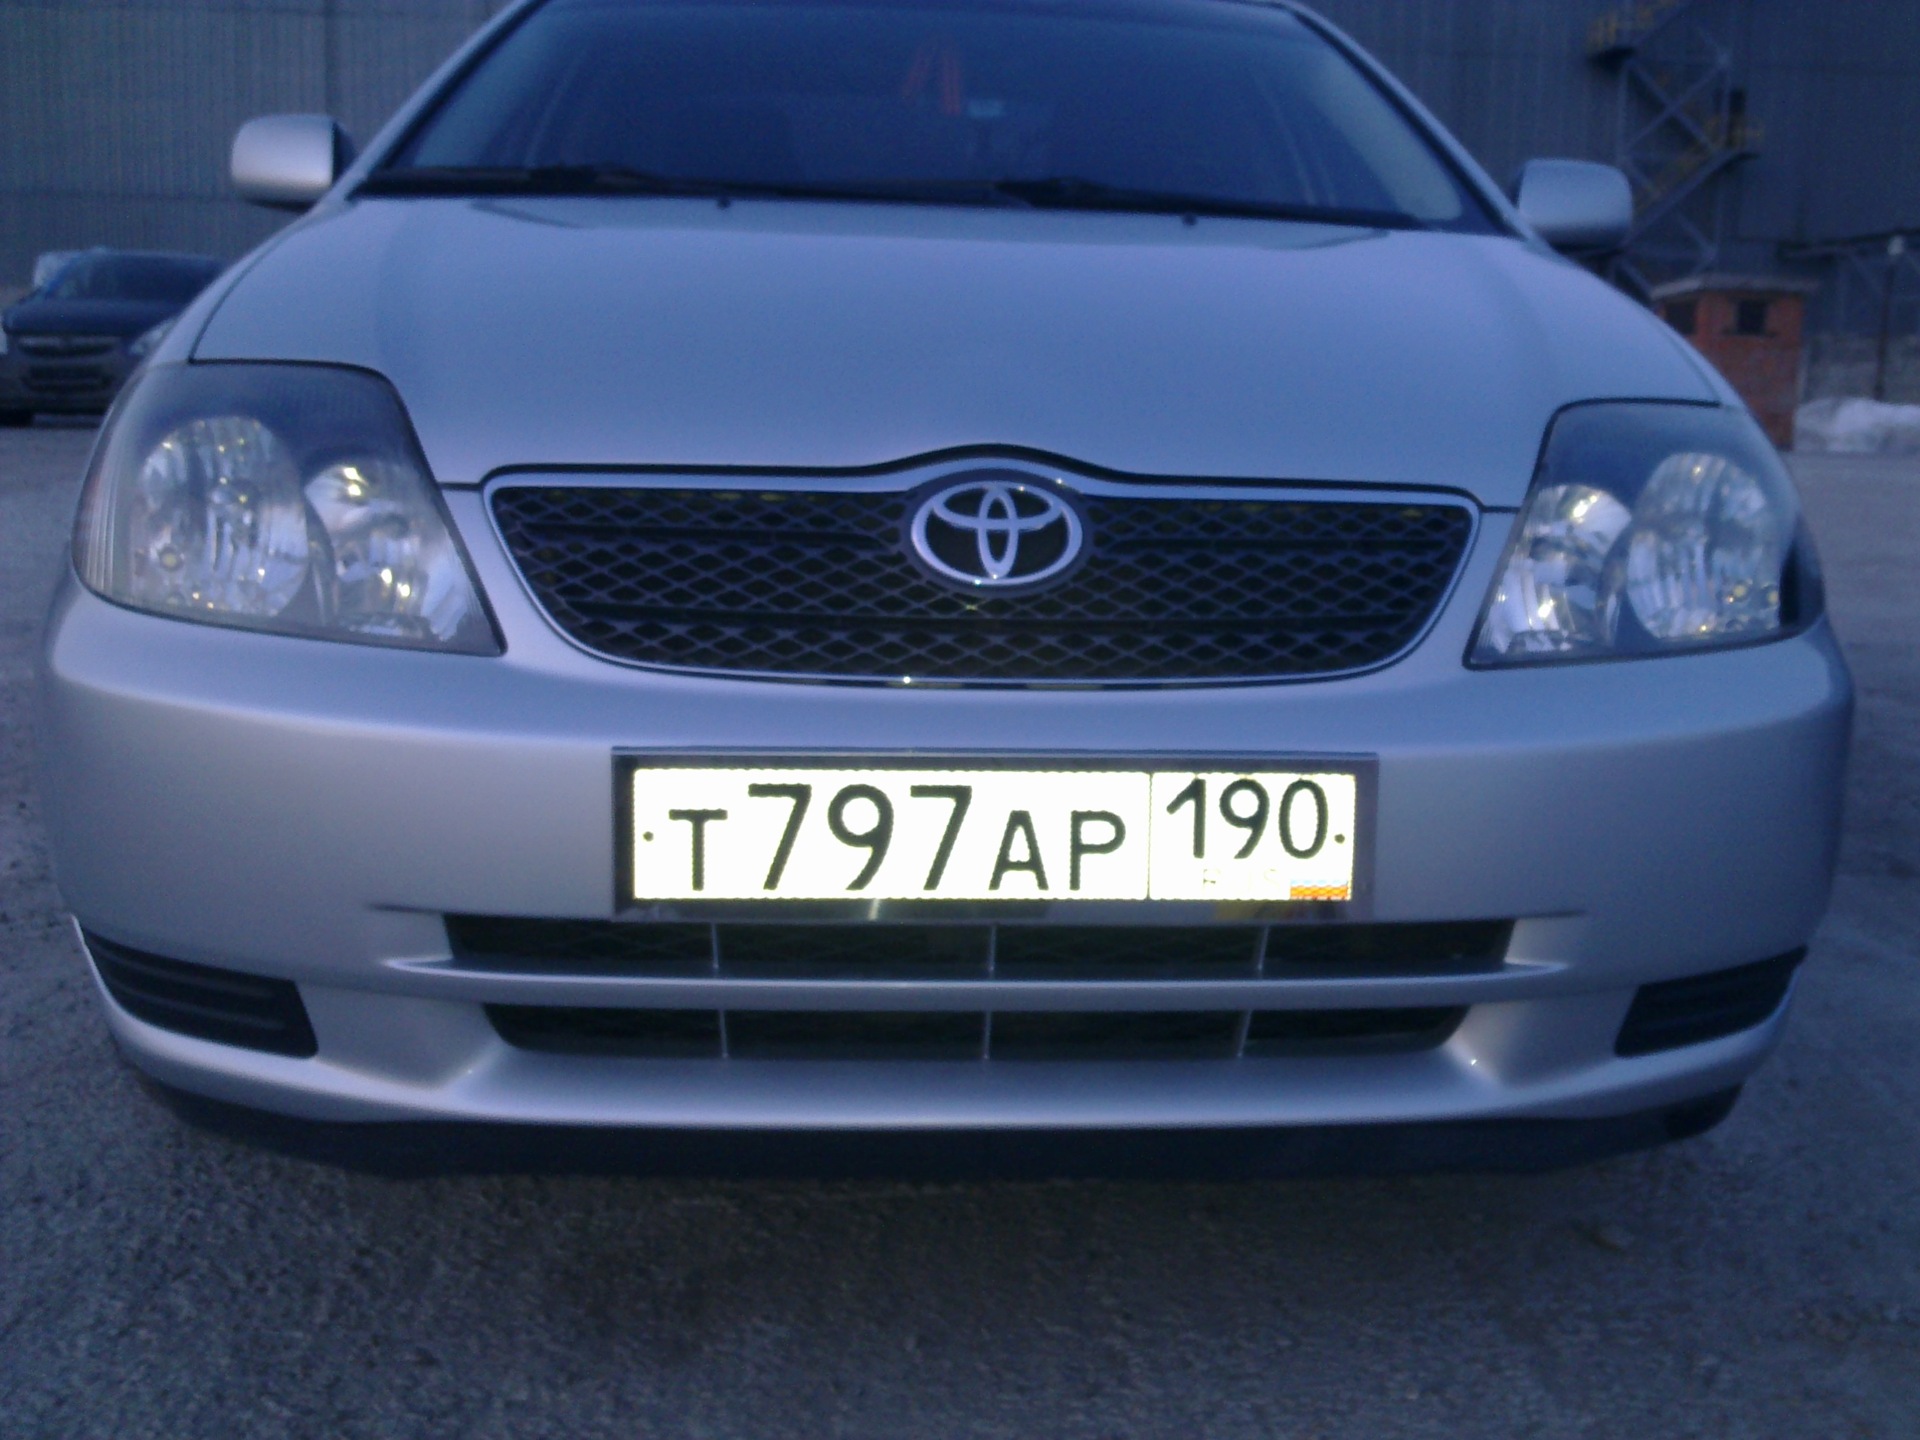 Optics alteration or down with chrome - Toyota Corolla 16 liter 2003